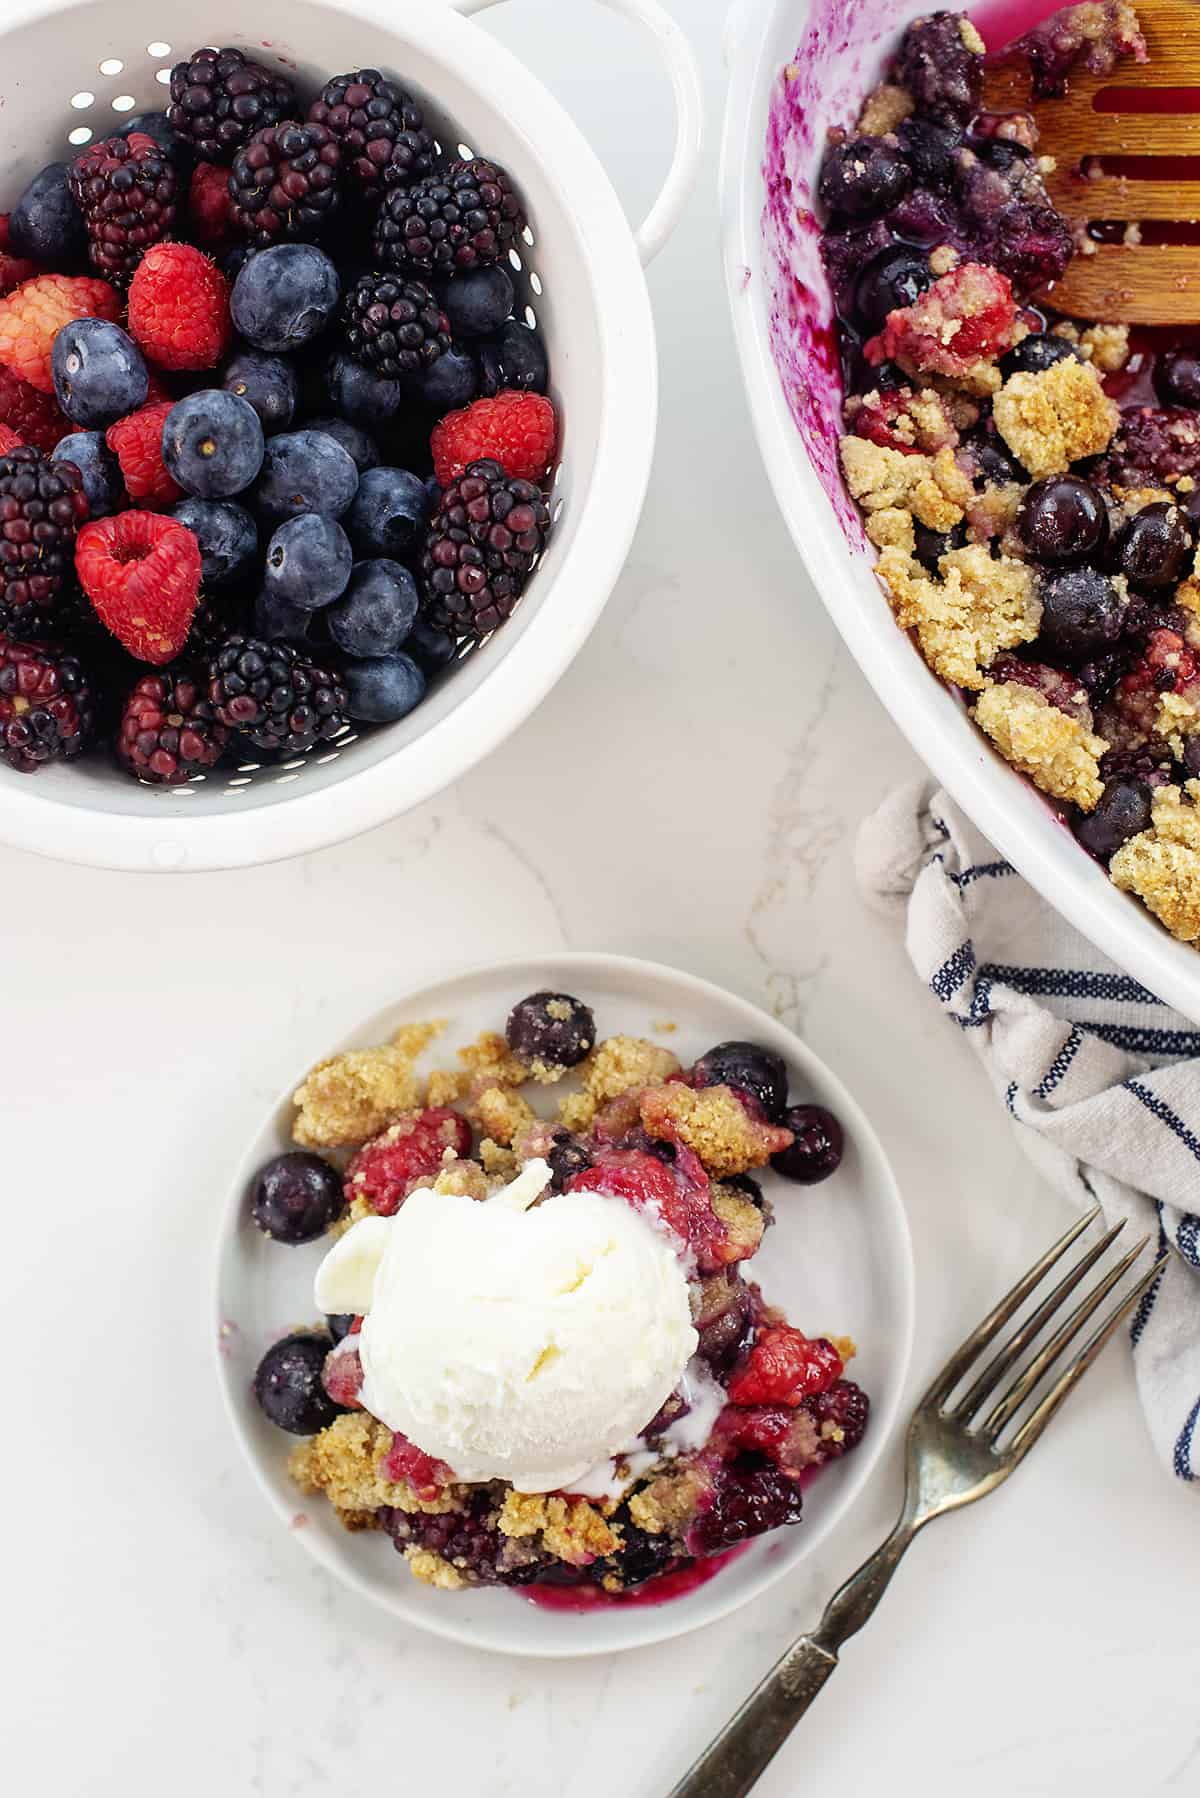 Overhead view of keto berry crisp on plate with ice cream.